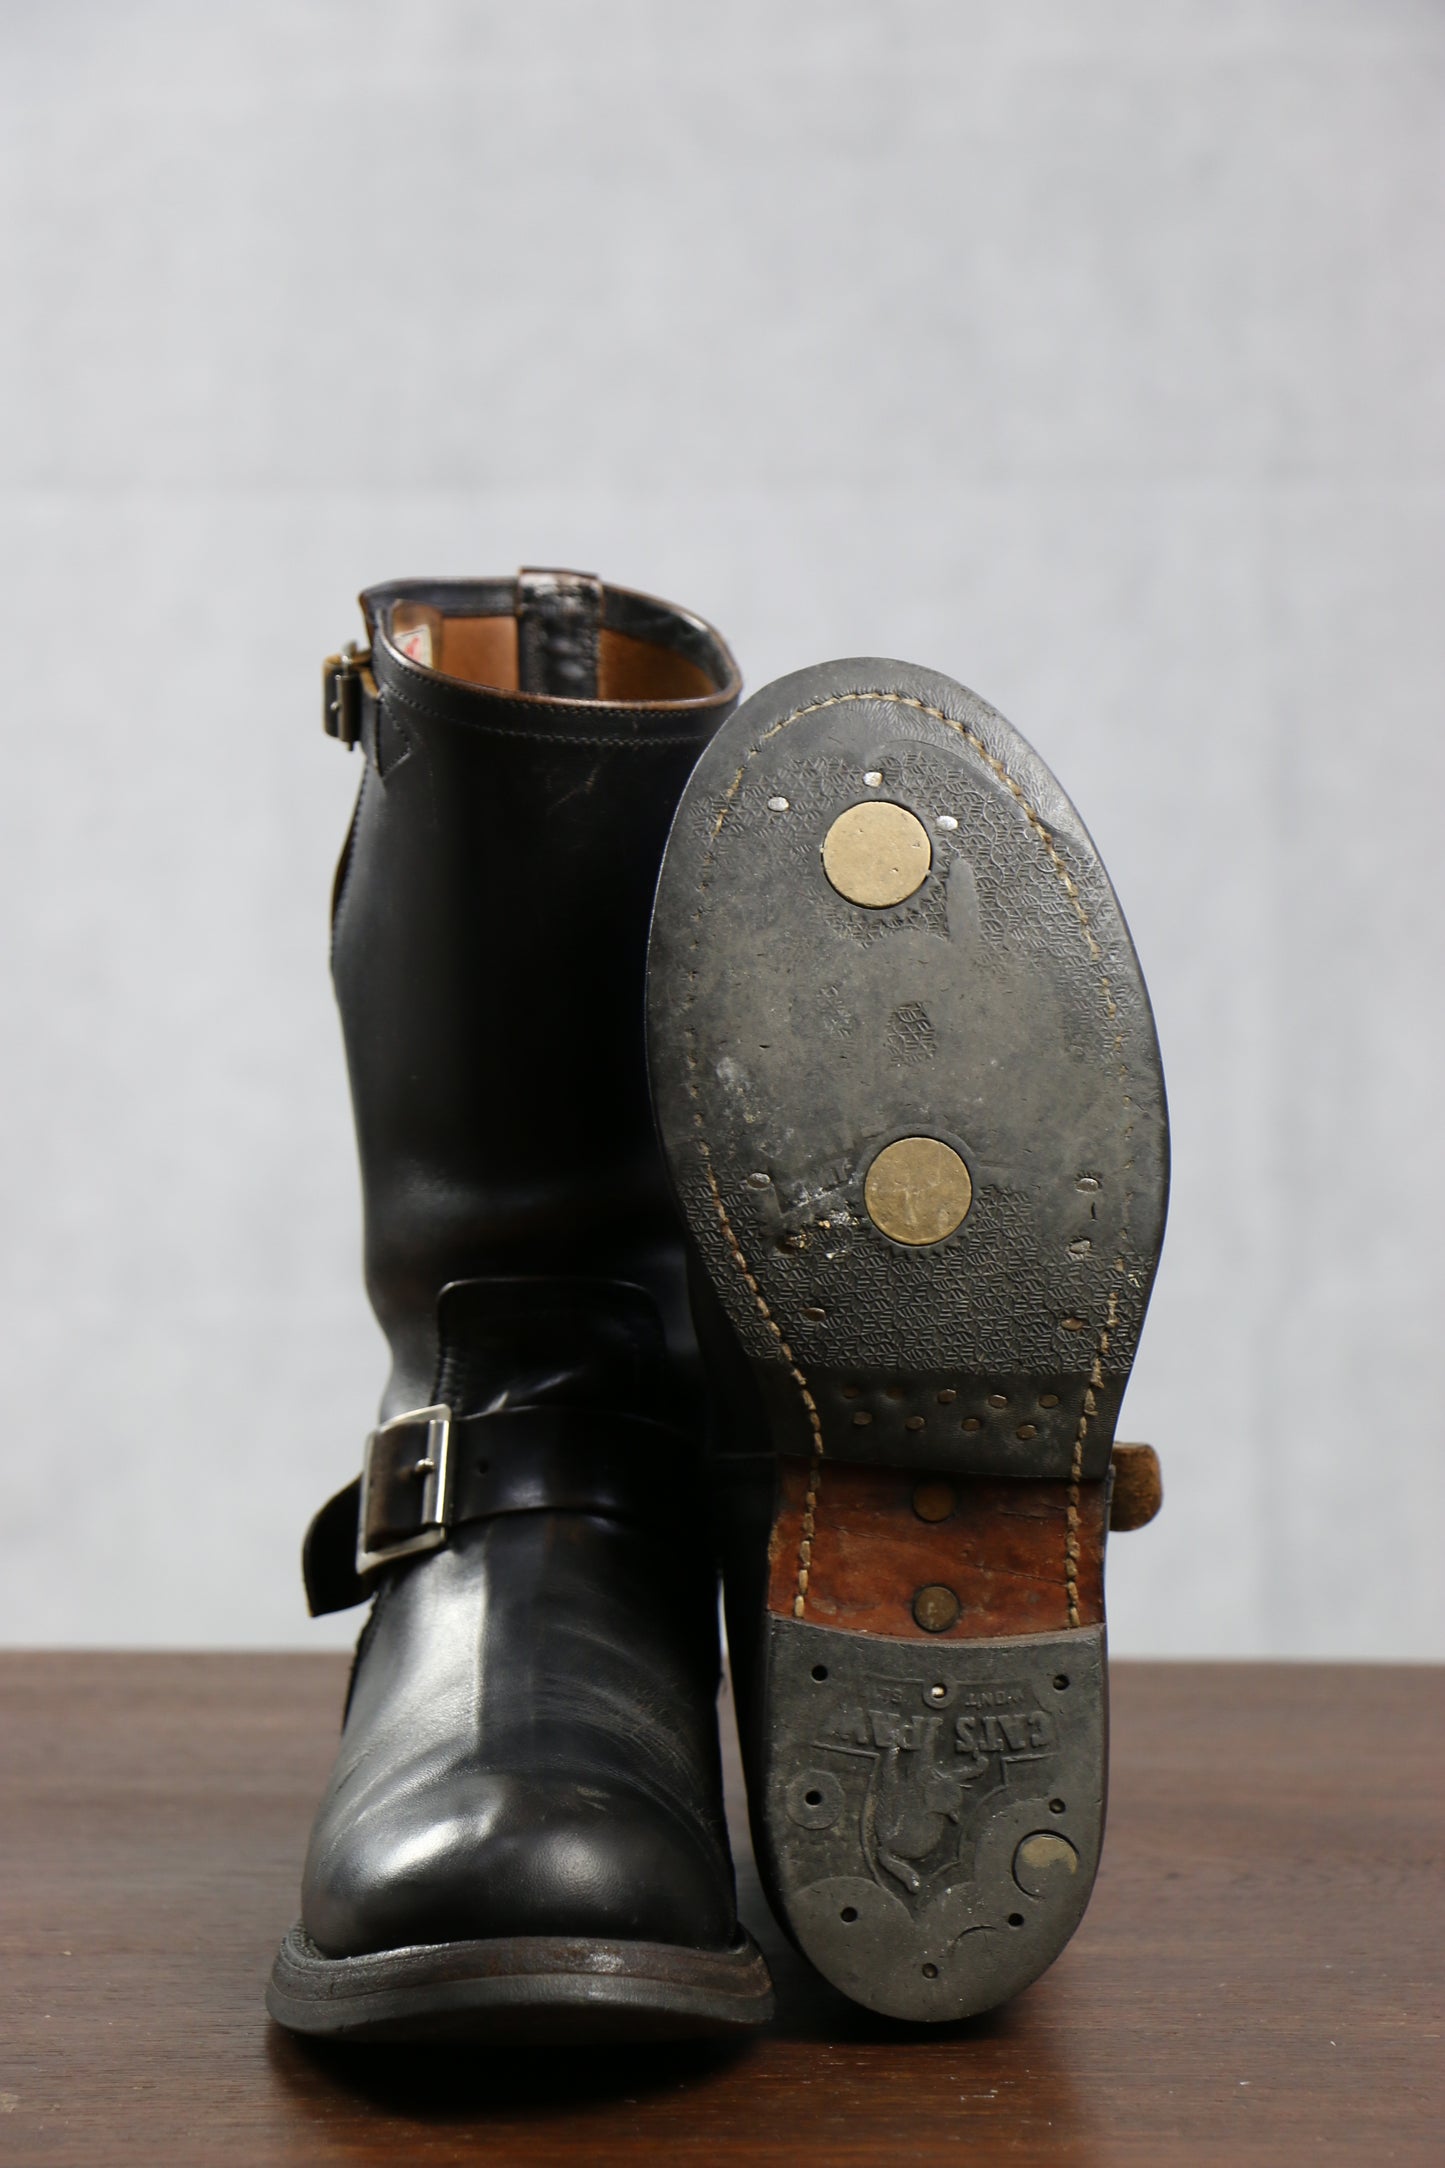 The Real McCoy's Buco Horsehide Engineer Boots